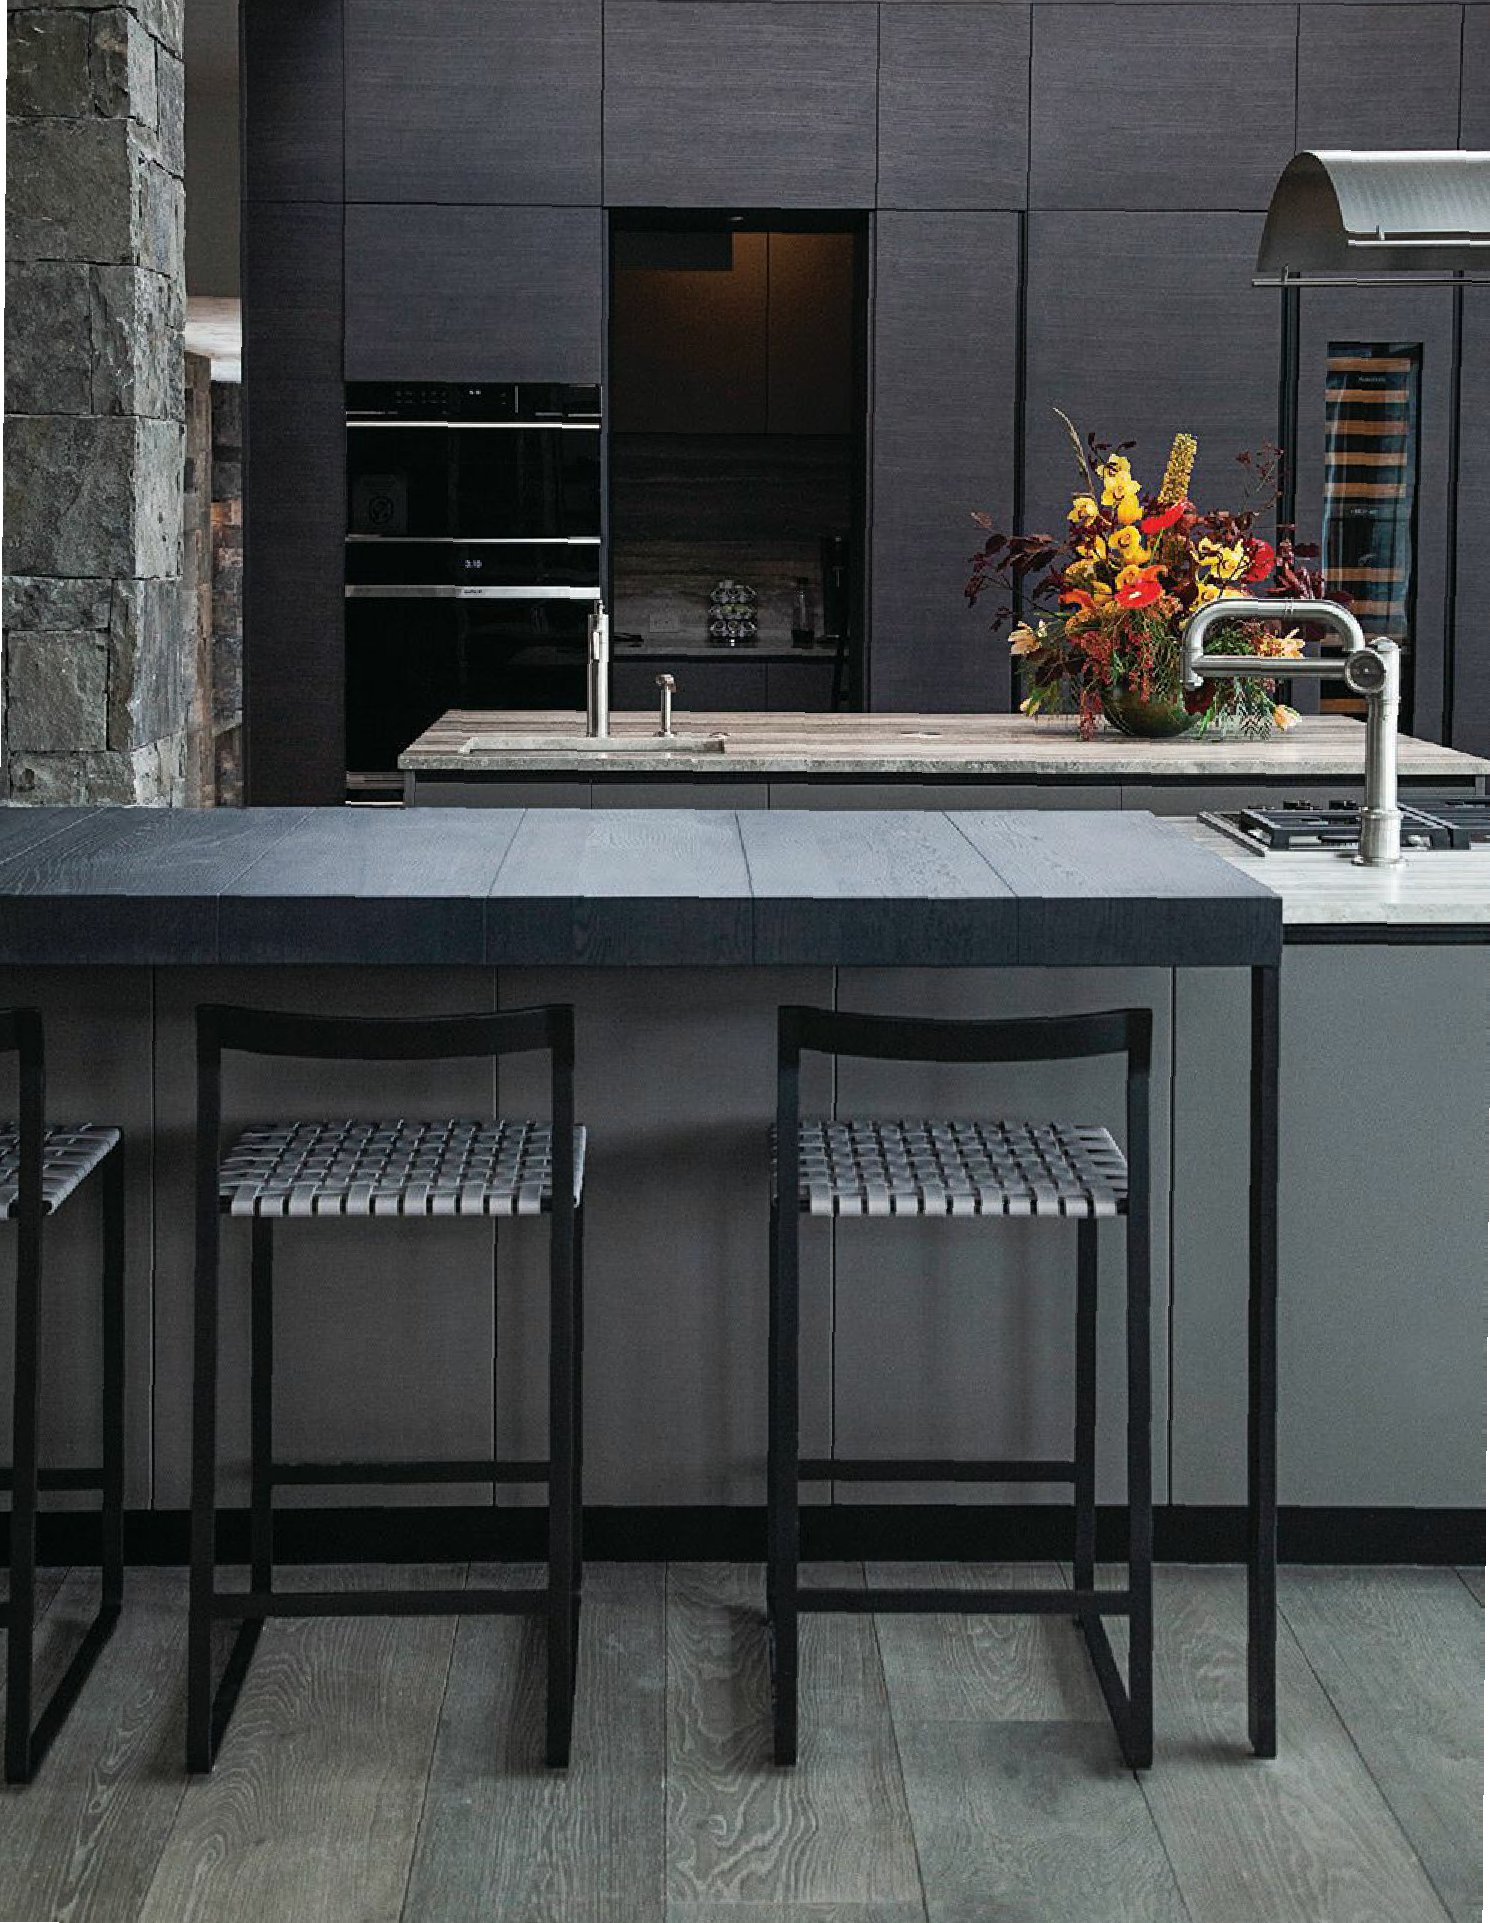 A detail of the sleek Poliform kitchen Photographed by Michael Brands and Brooke Casillas